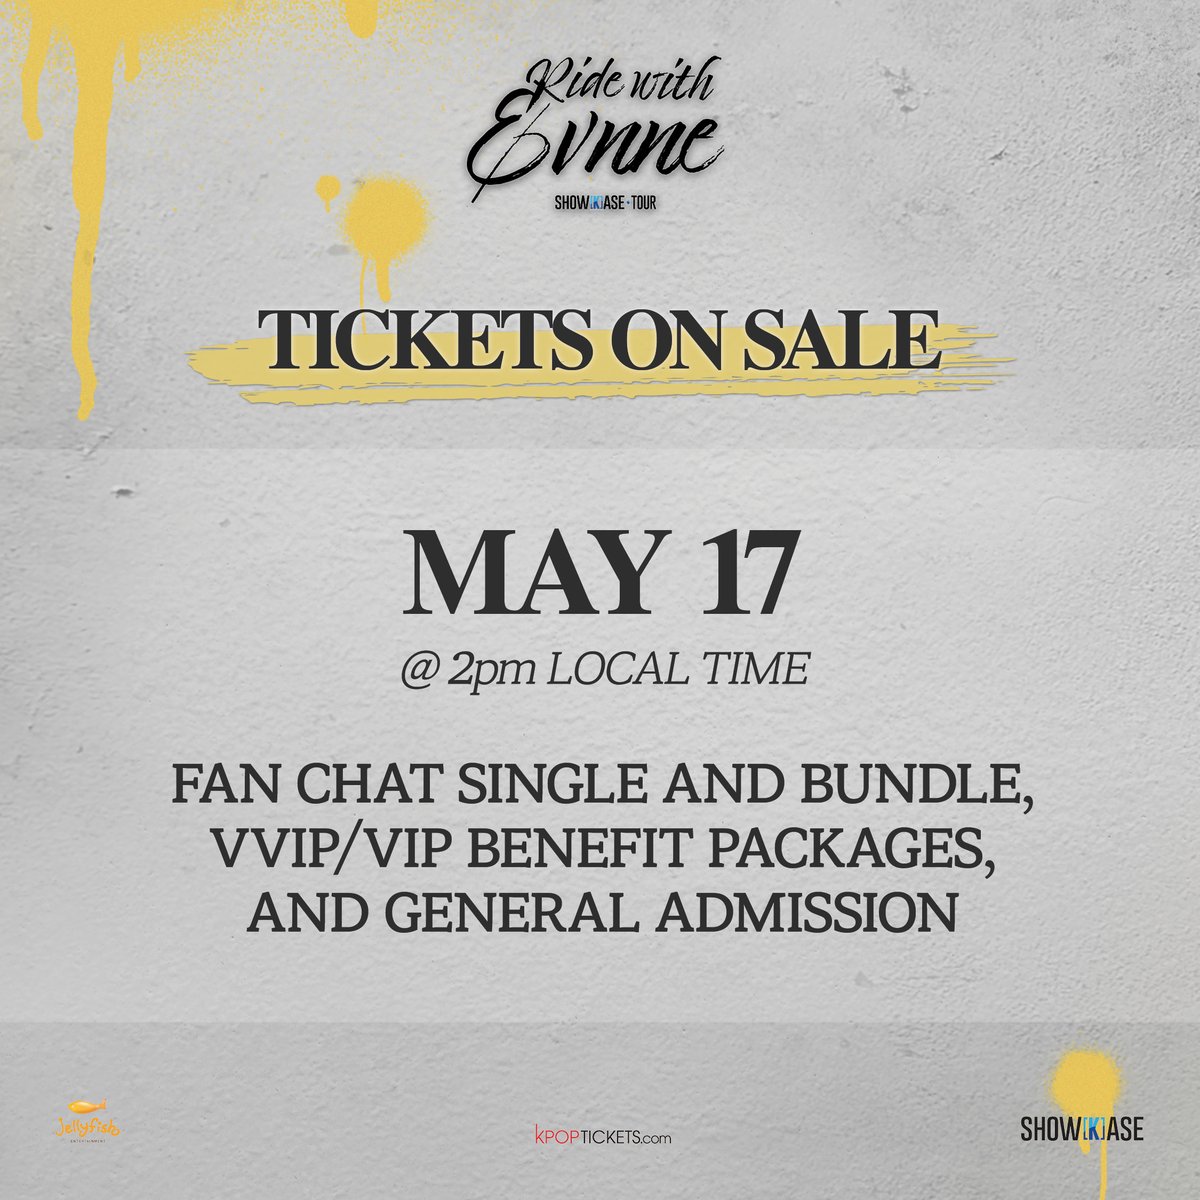 #ENNVE TODAY IS THE BIG DAY😱! Here are some things to keep in mind when getting tickets for EVNNE ✨All benefit and admission tickets can be found on our kpoptickets.com website ✨VVIP, VIP, and Fan Chat tickets are sold directly from our kpoptickets.com website